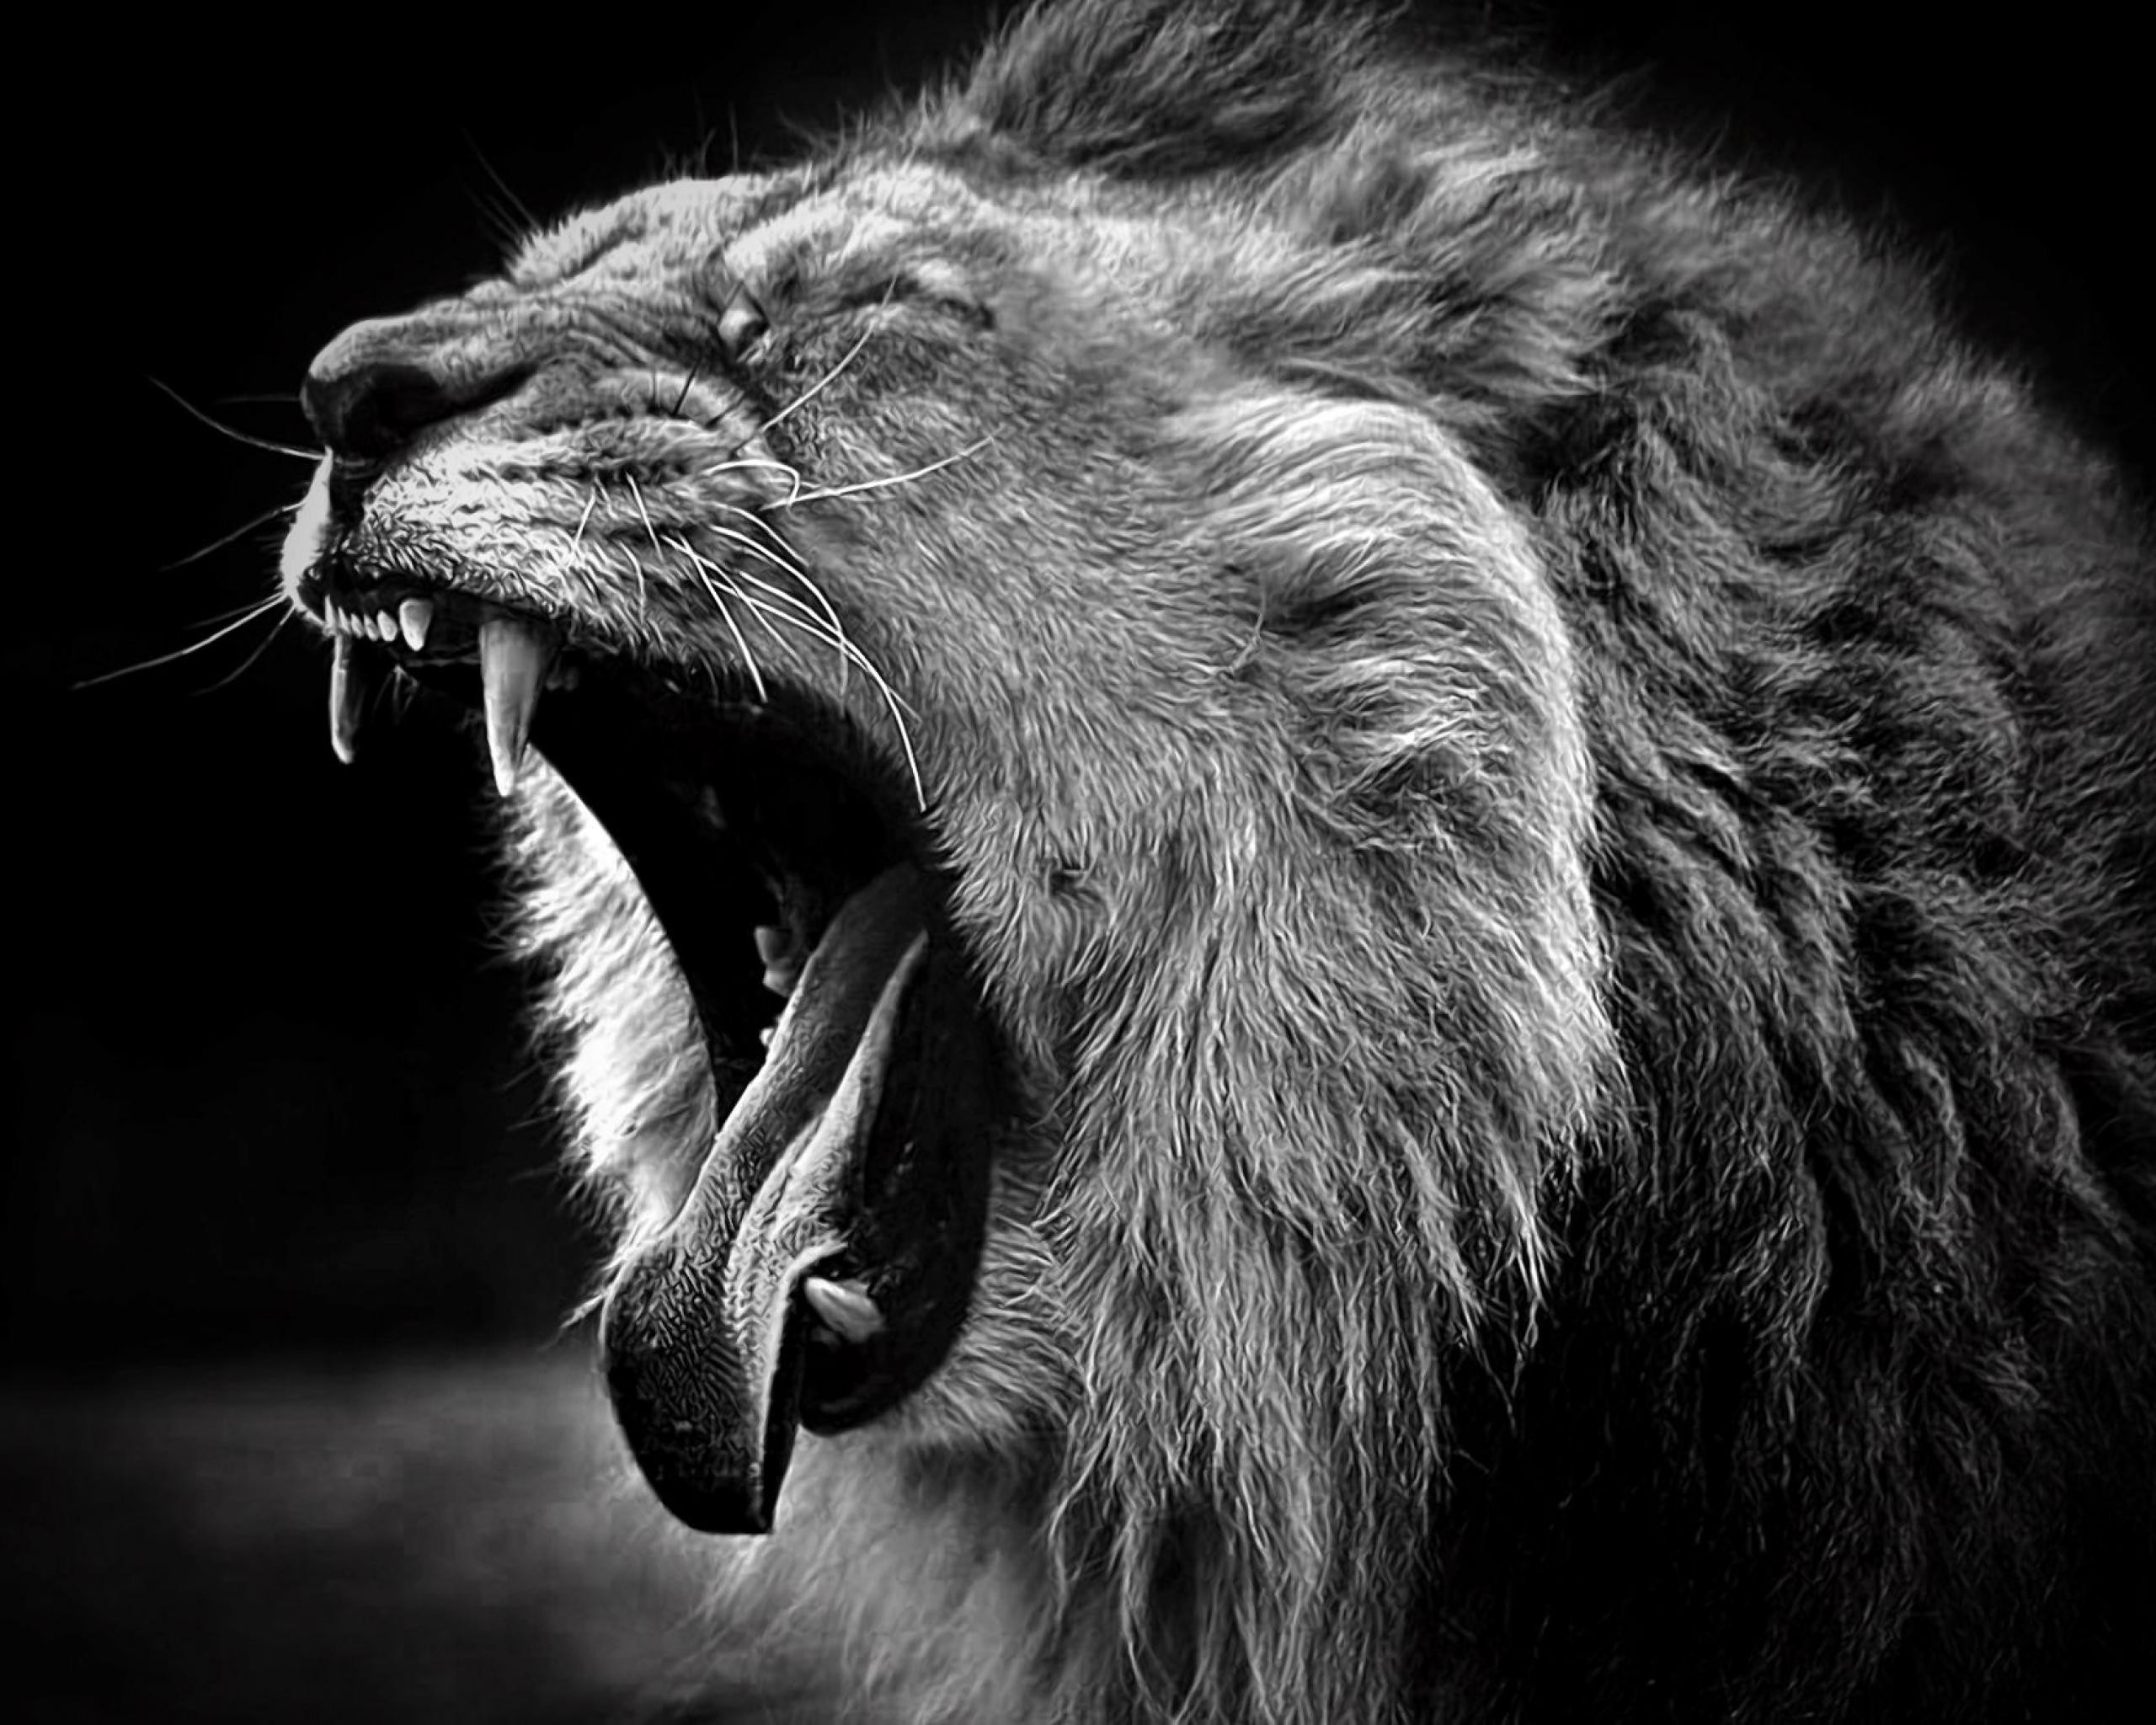 Lion Wallpaper Black And White 50 Images